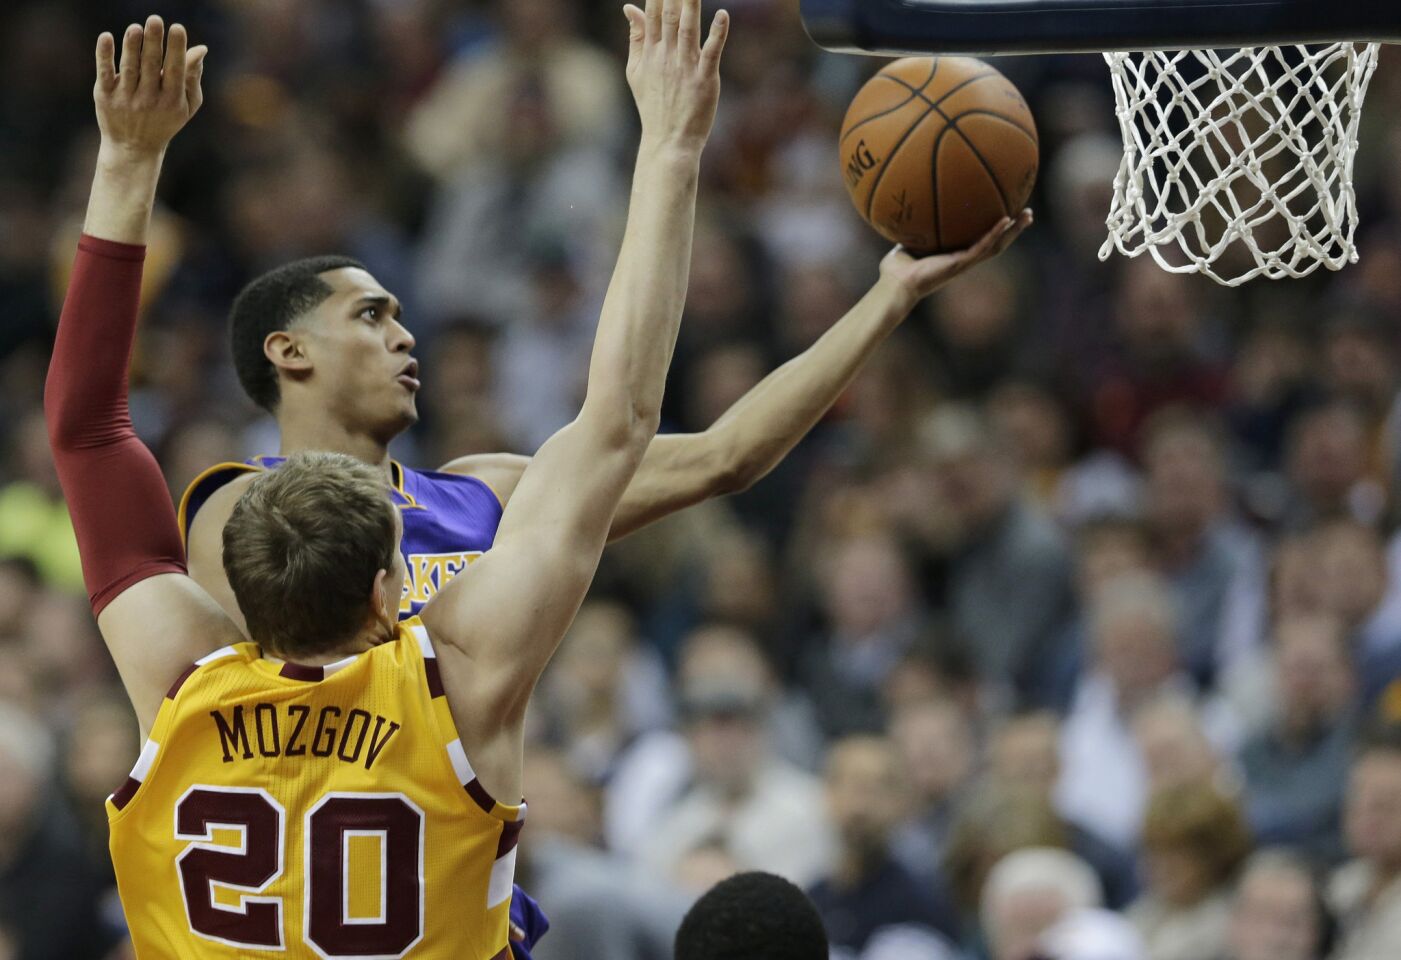 Lakers guard Jordan Clarkson drives to the basket in front of Cavaliers center Timofey Mozgov during the first half of a game on Feb. 10.